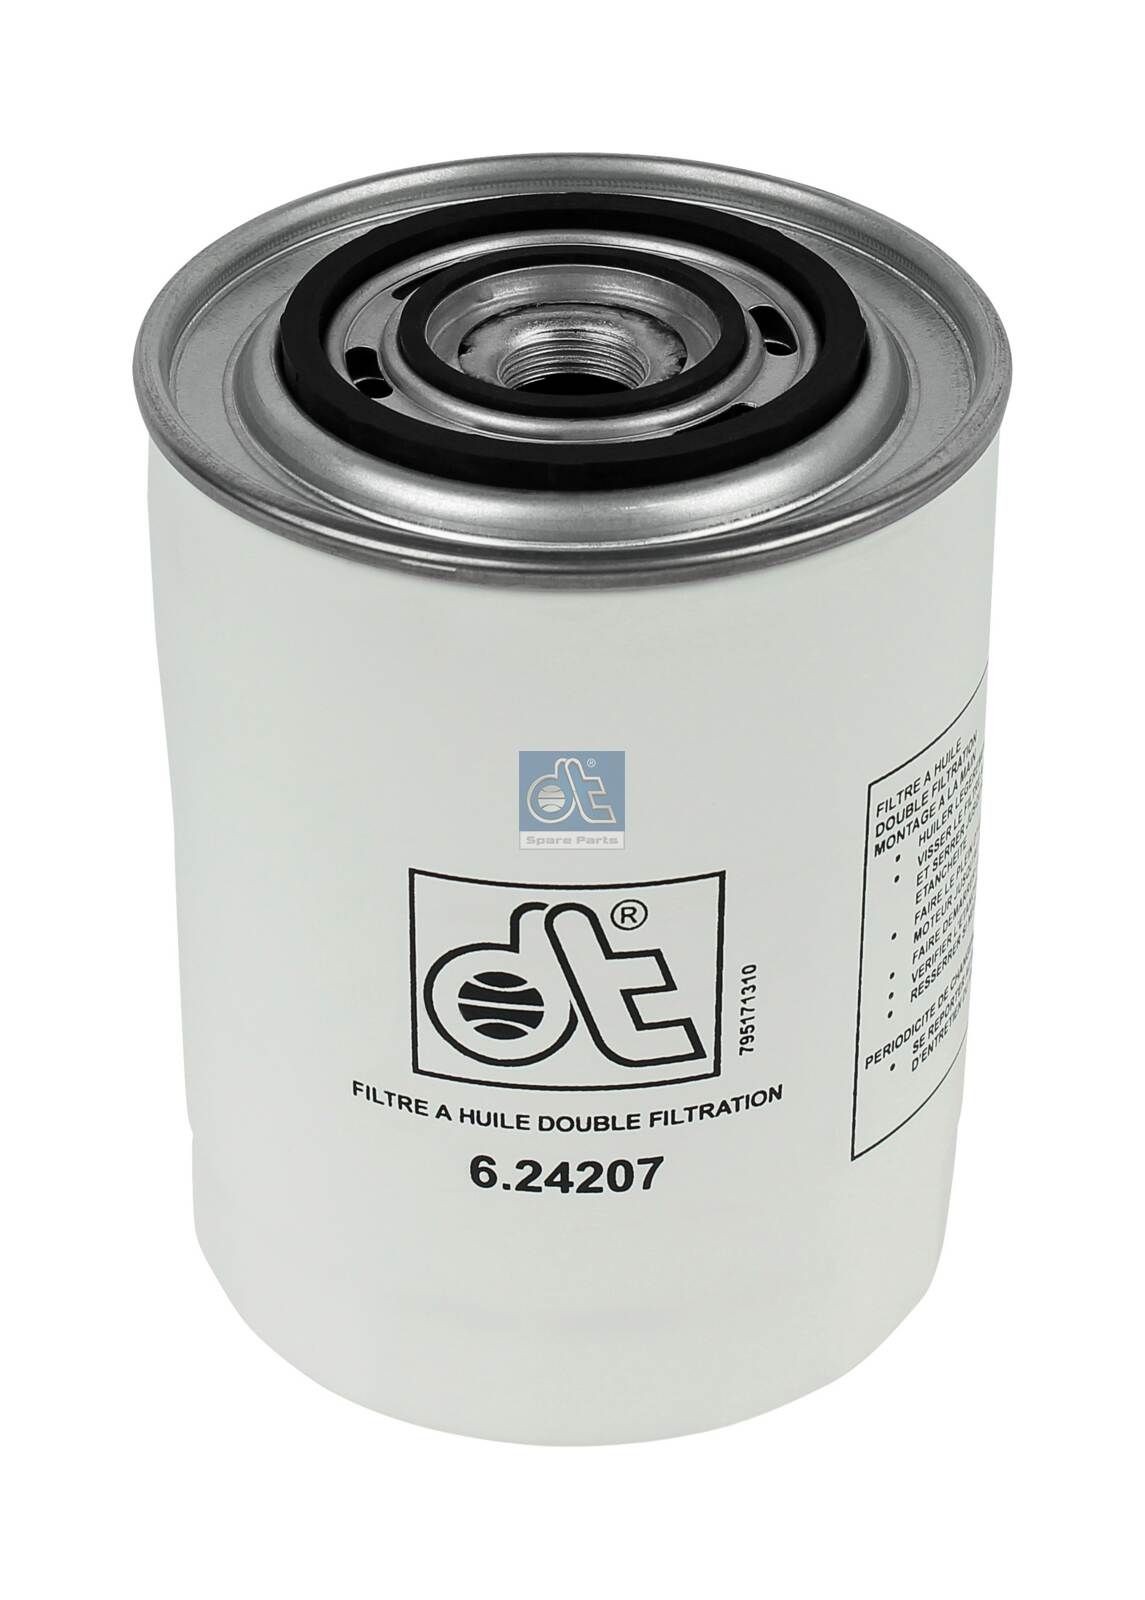 WP 1144 DT Spare Parts 6.24207 Oil filter 05983900